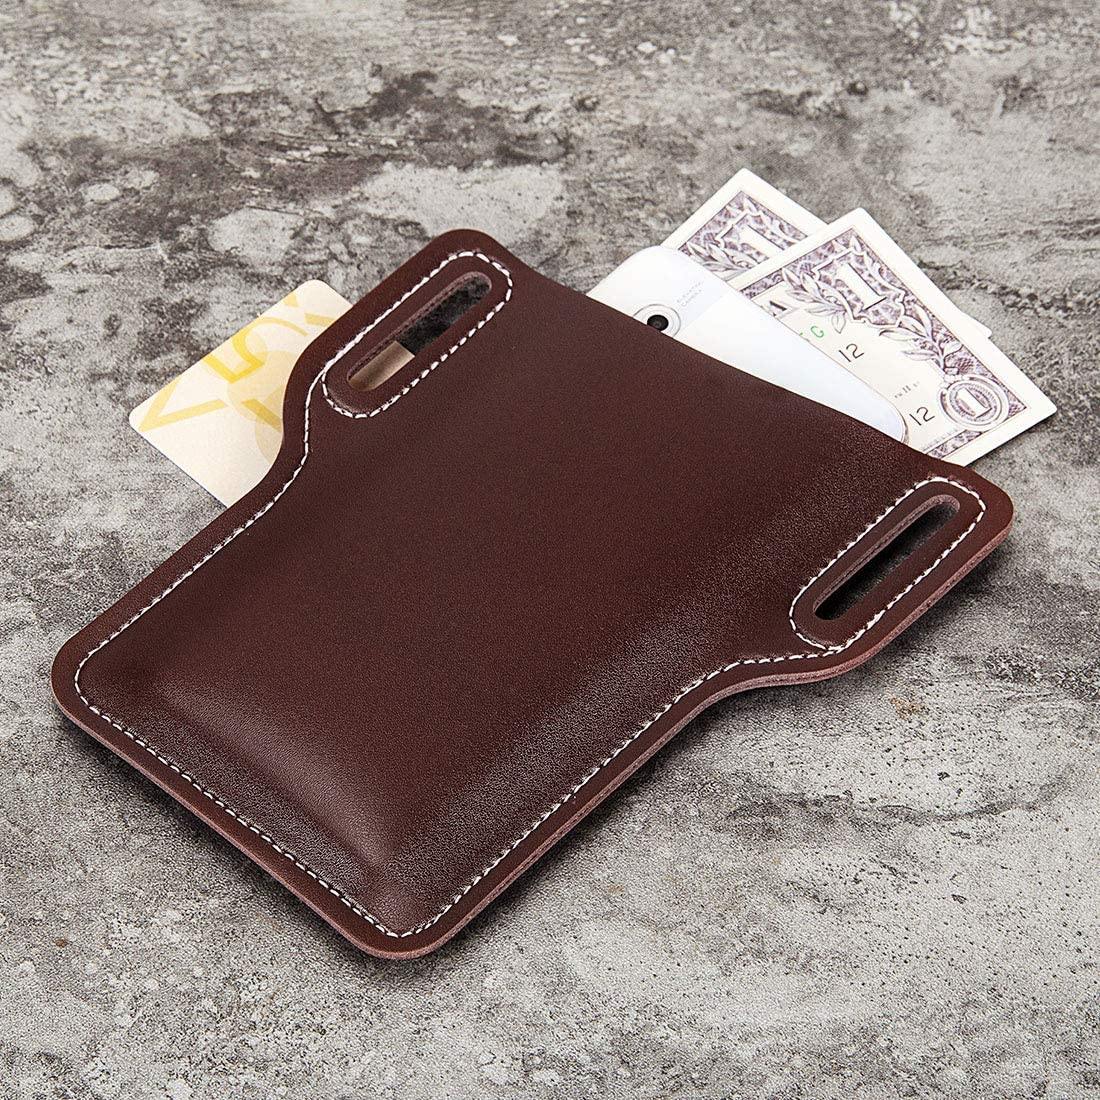 Phone Leather Case Belt Holster for Mobile Phone Protection iPhone Samsung EDC Sheath Pouch Men Handmade PU Leather Waist Dark Brown - Silipac